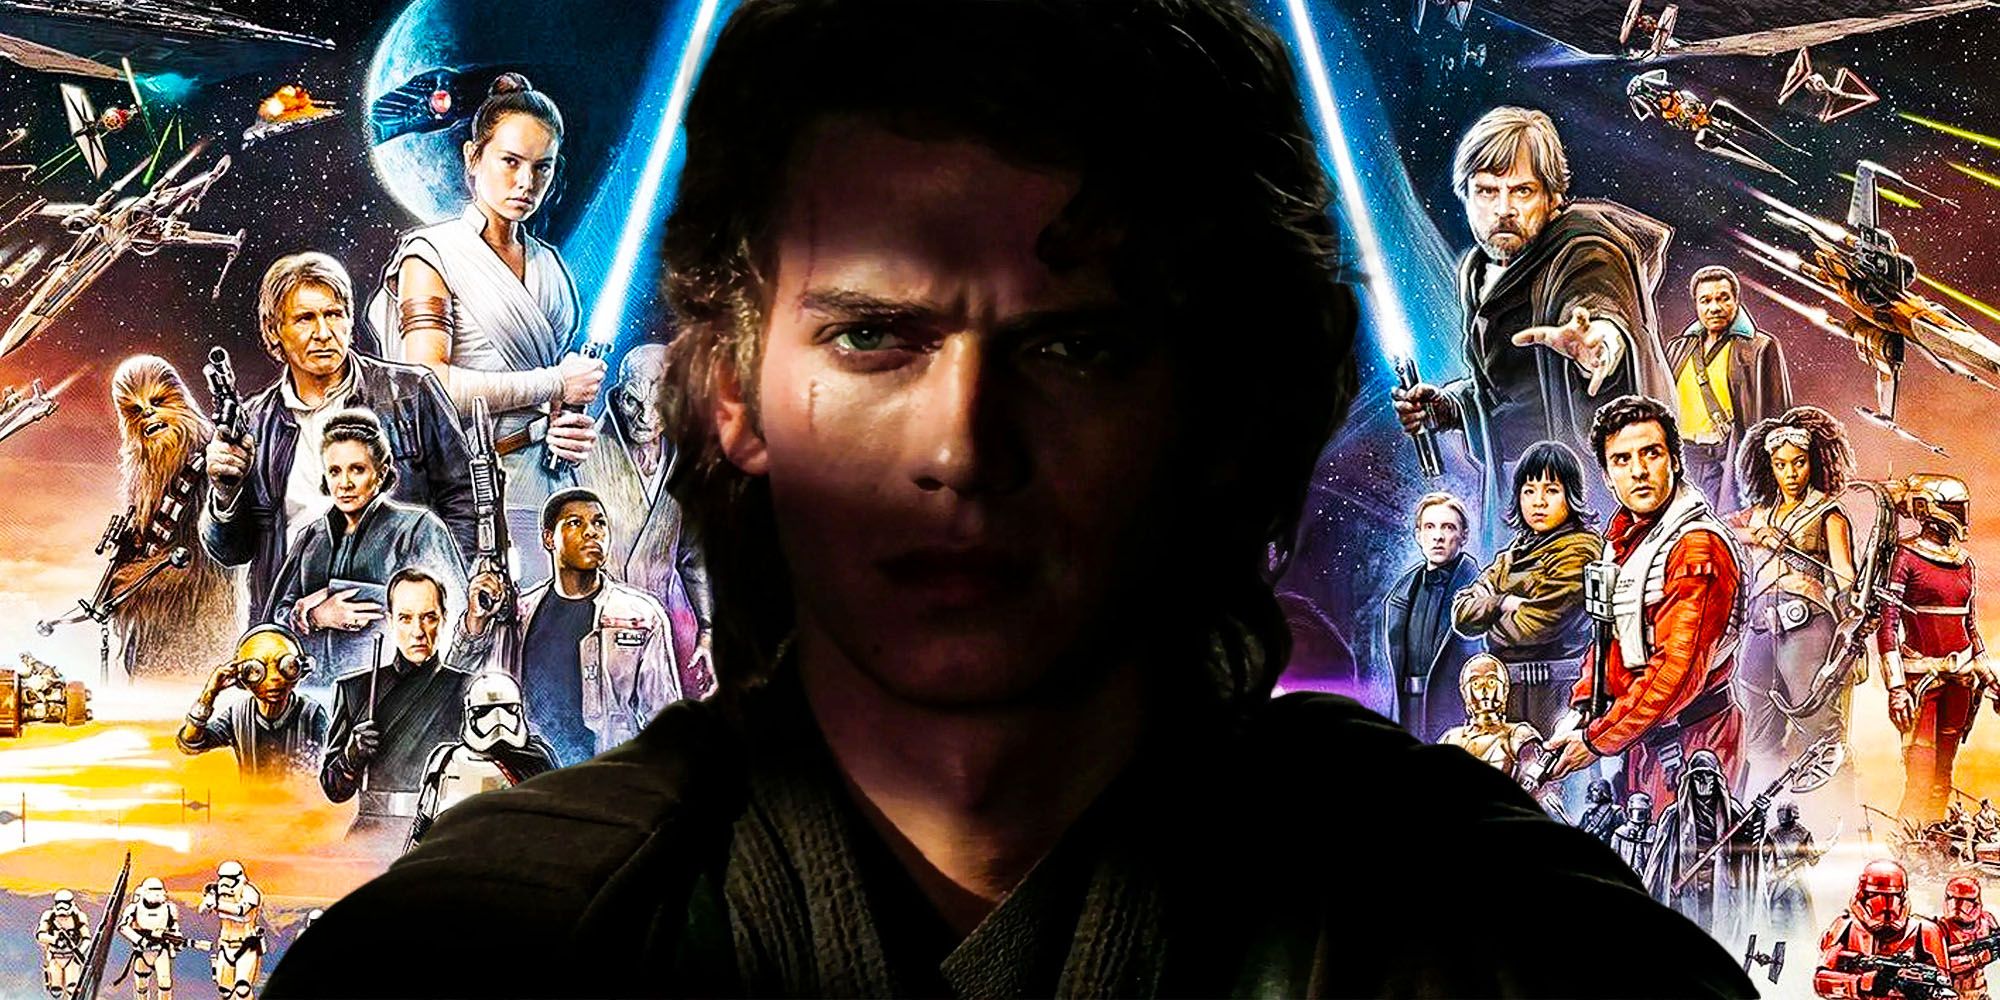 Star wars revenge of the sith broke a star wars release tradition